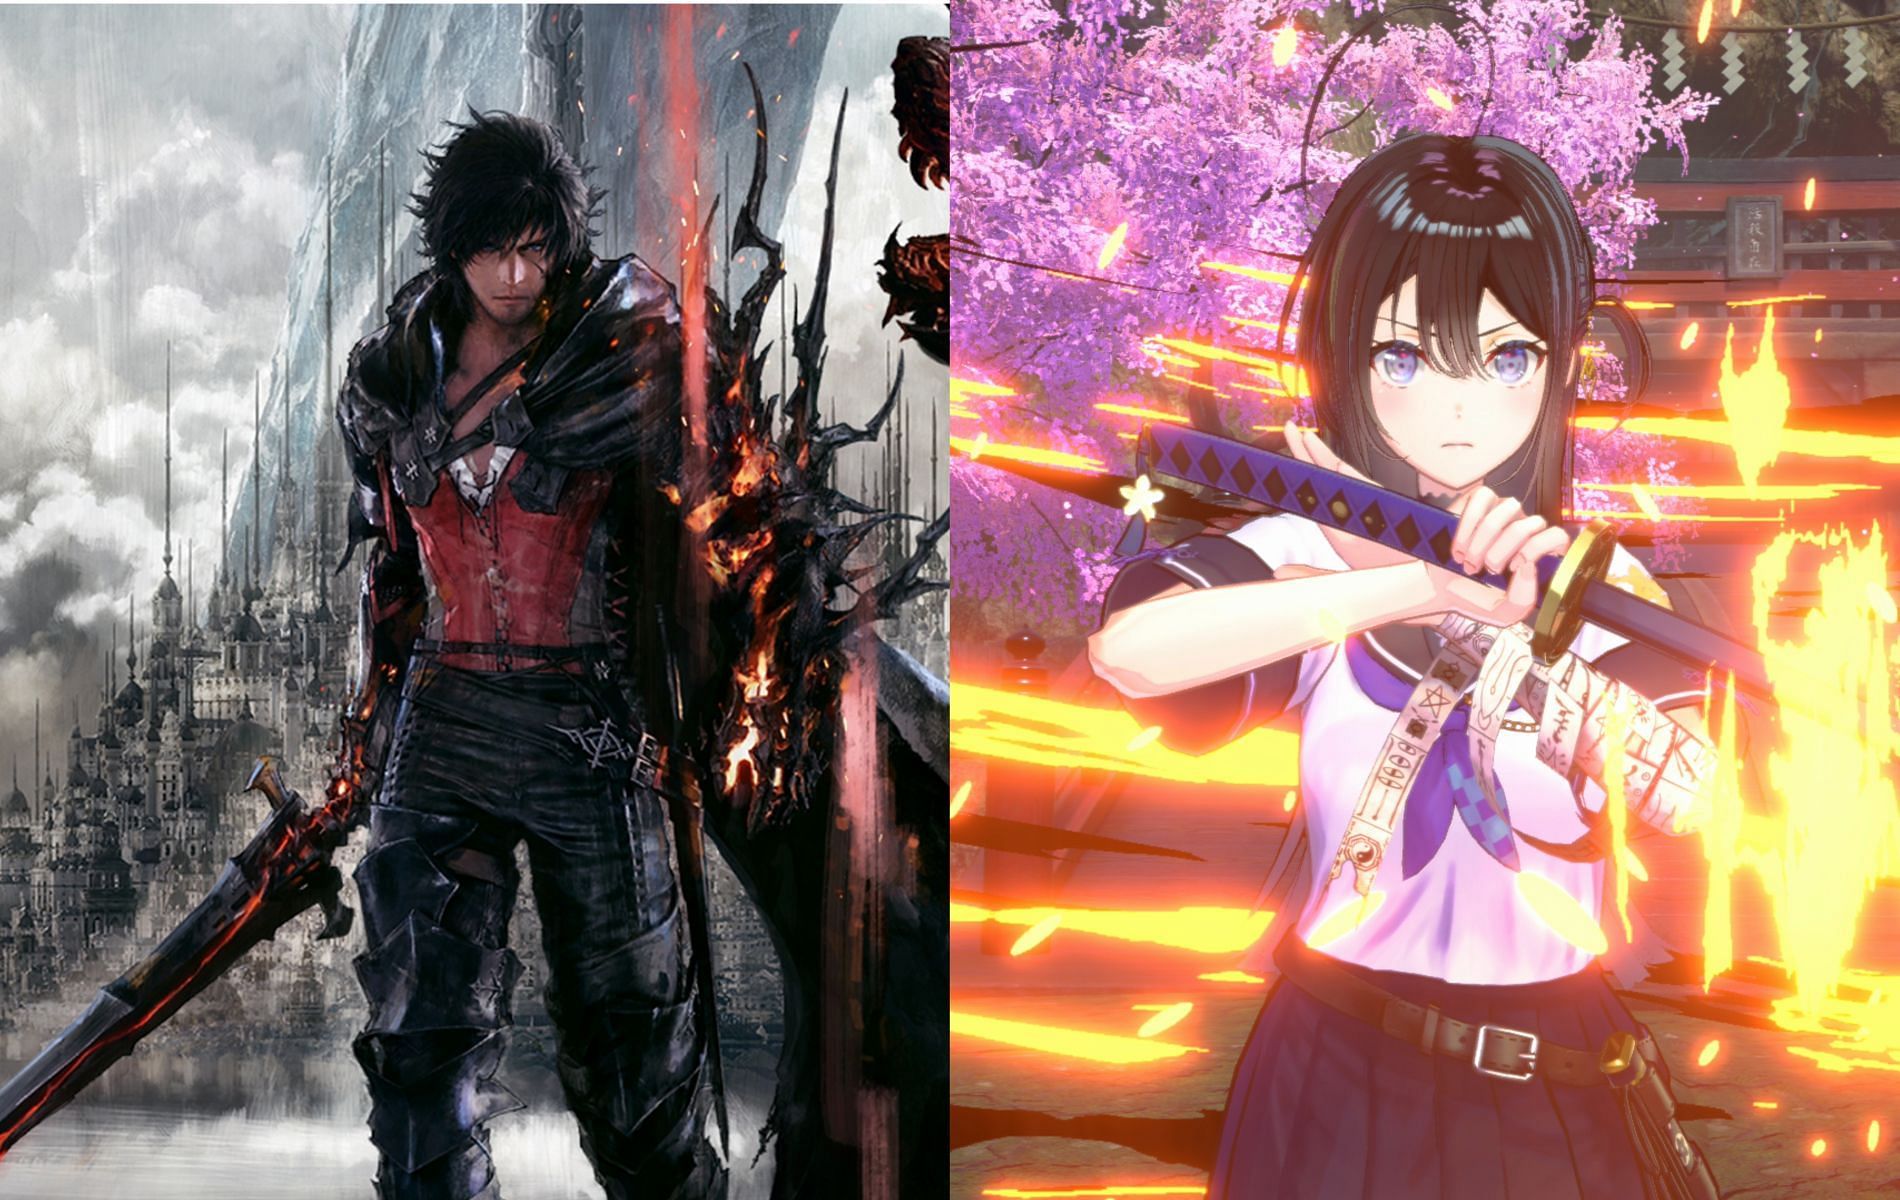 Whether you are a fan of action-adventure, sci-fi, or even turn-based combat, JRPGs have something for everyone to enjoy (Images via Square Enix and SHADE Inc.)